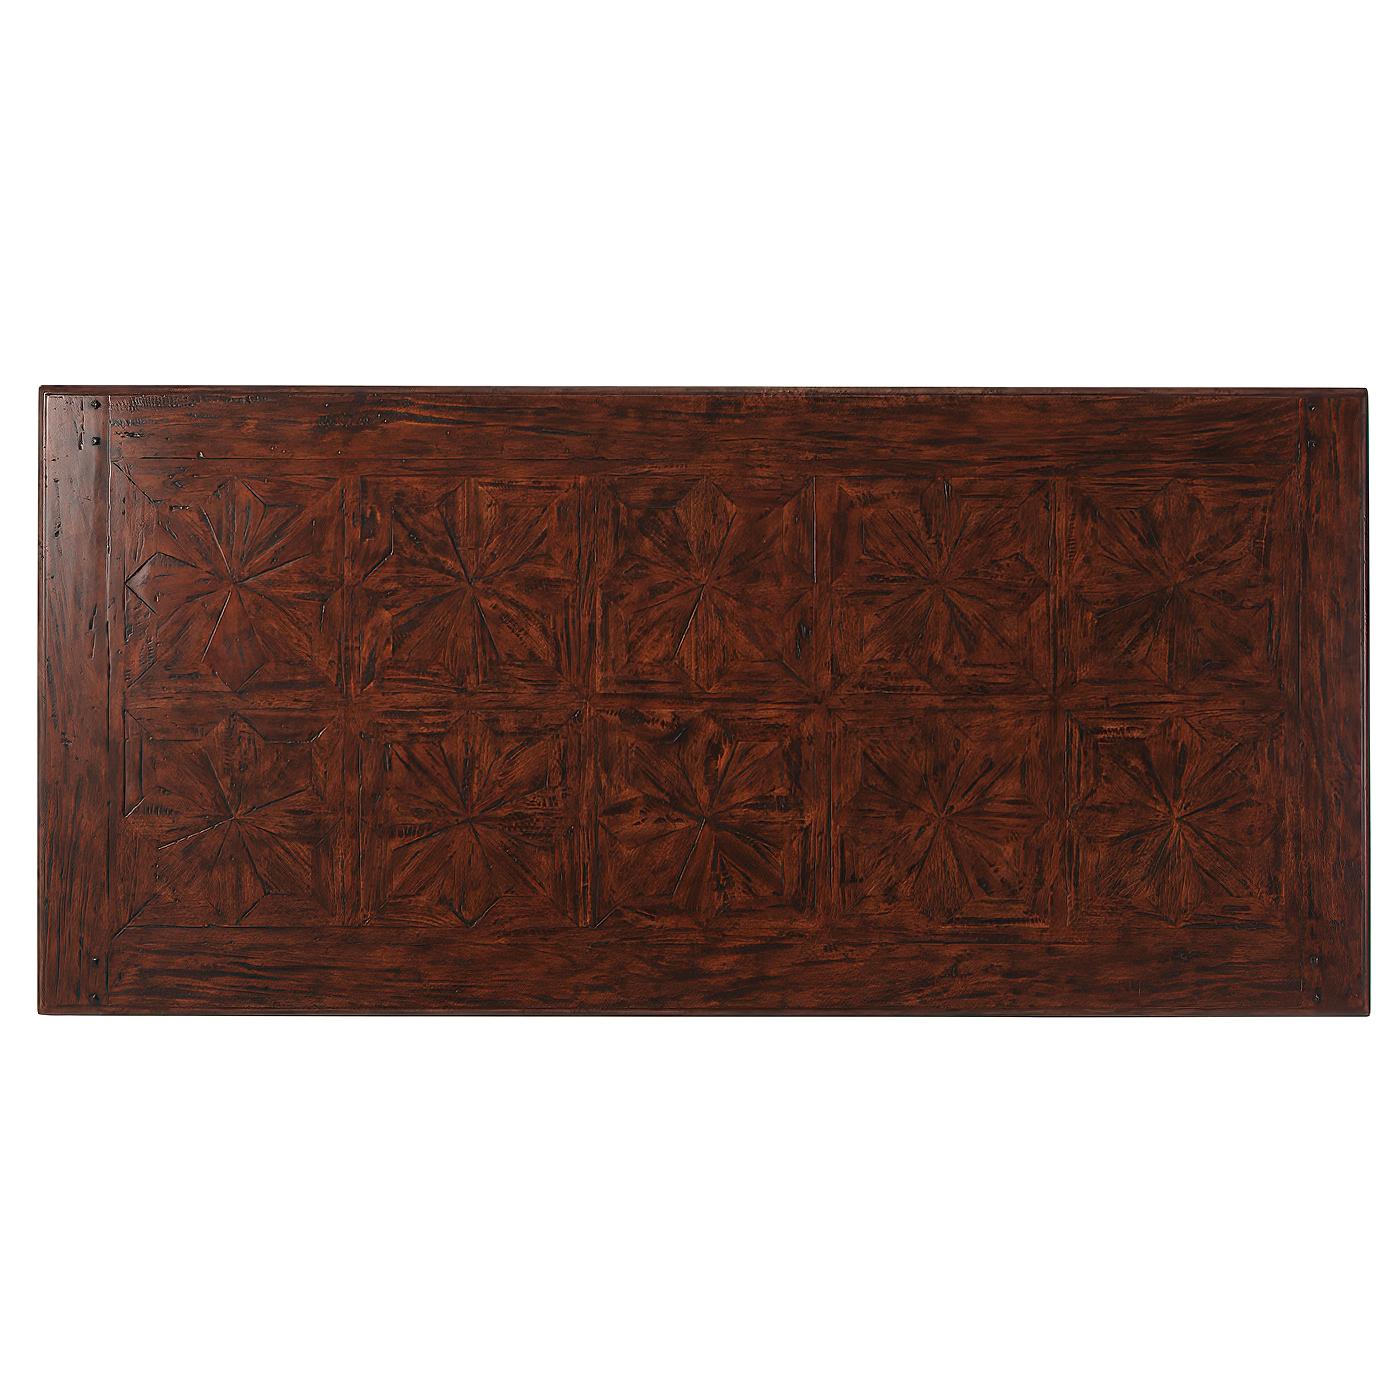 Vietnamese Italian Parquetry Refectory Dining Table